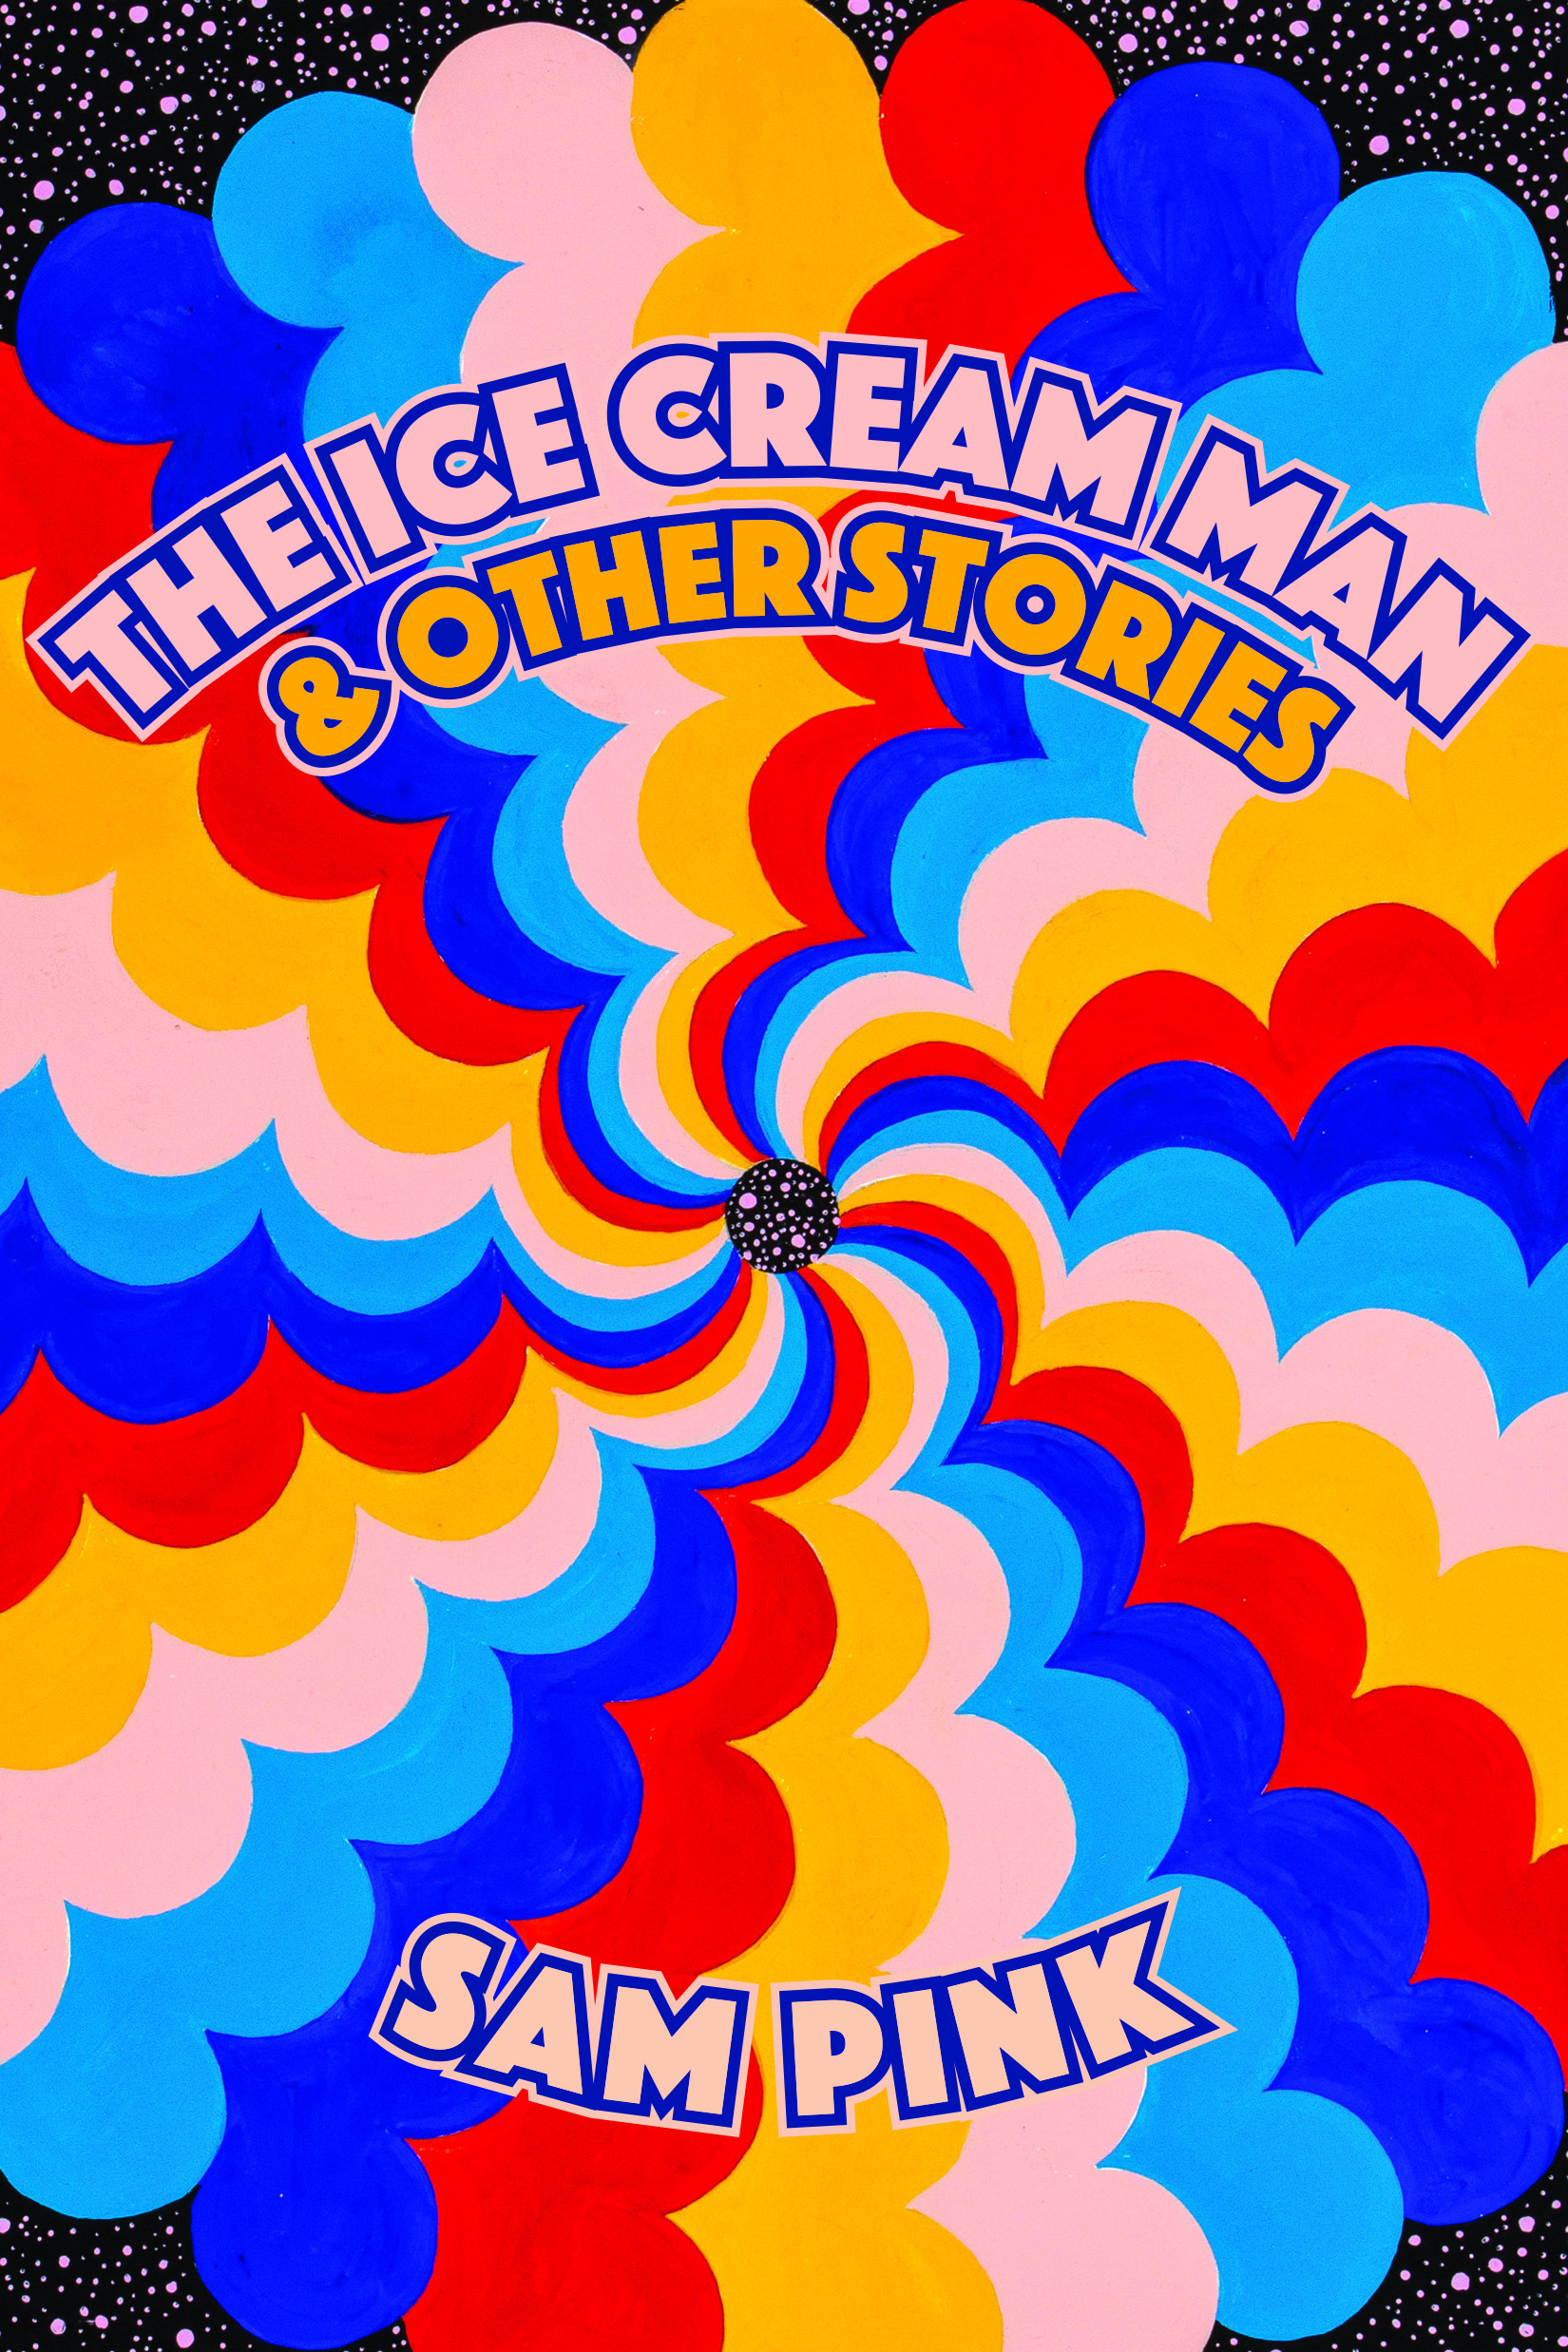 Book Launch: The Ice Cream Man by Sam Pink in conversation with Halle Butler (POSTPONED)